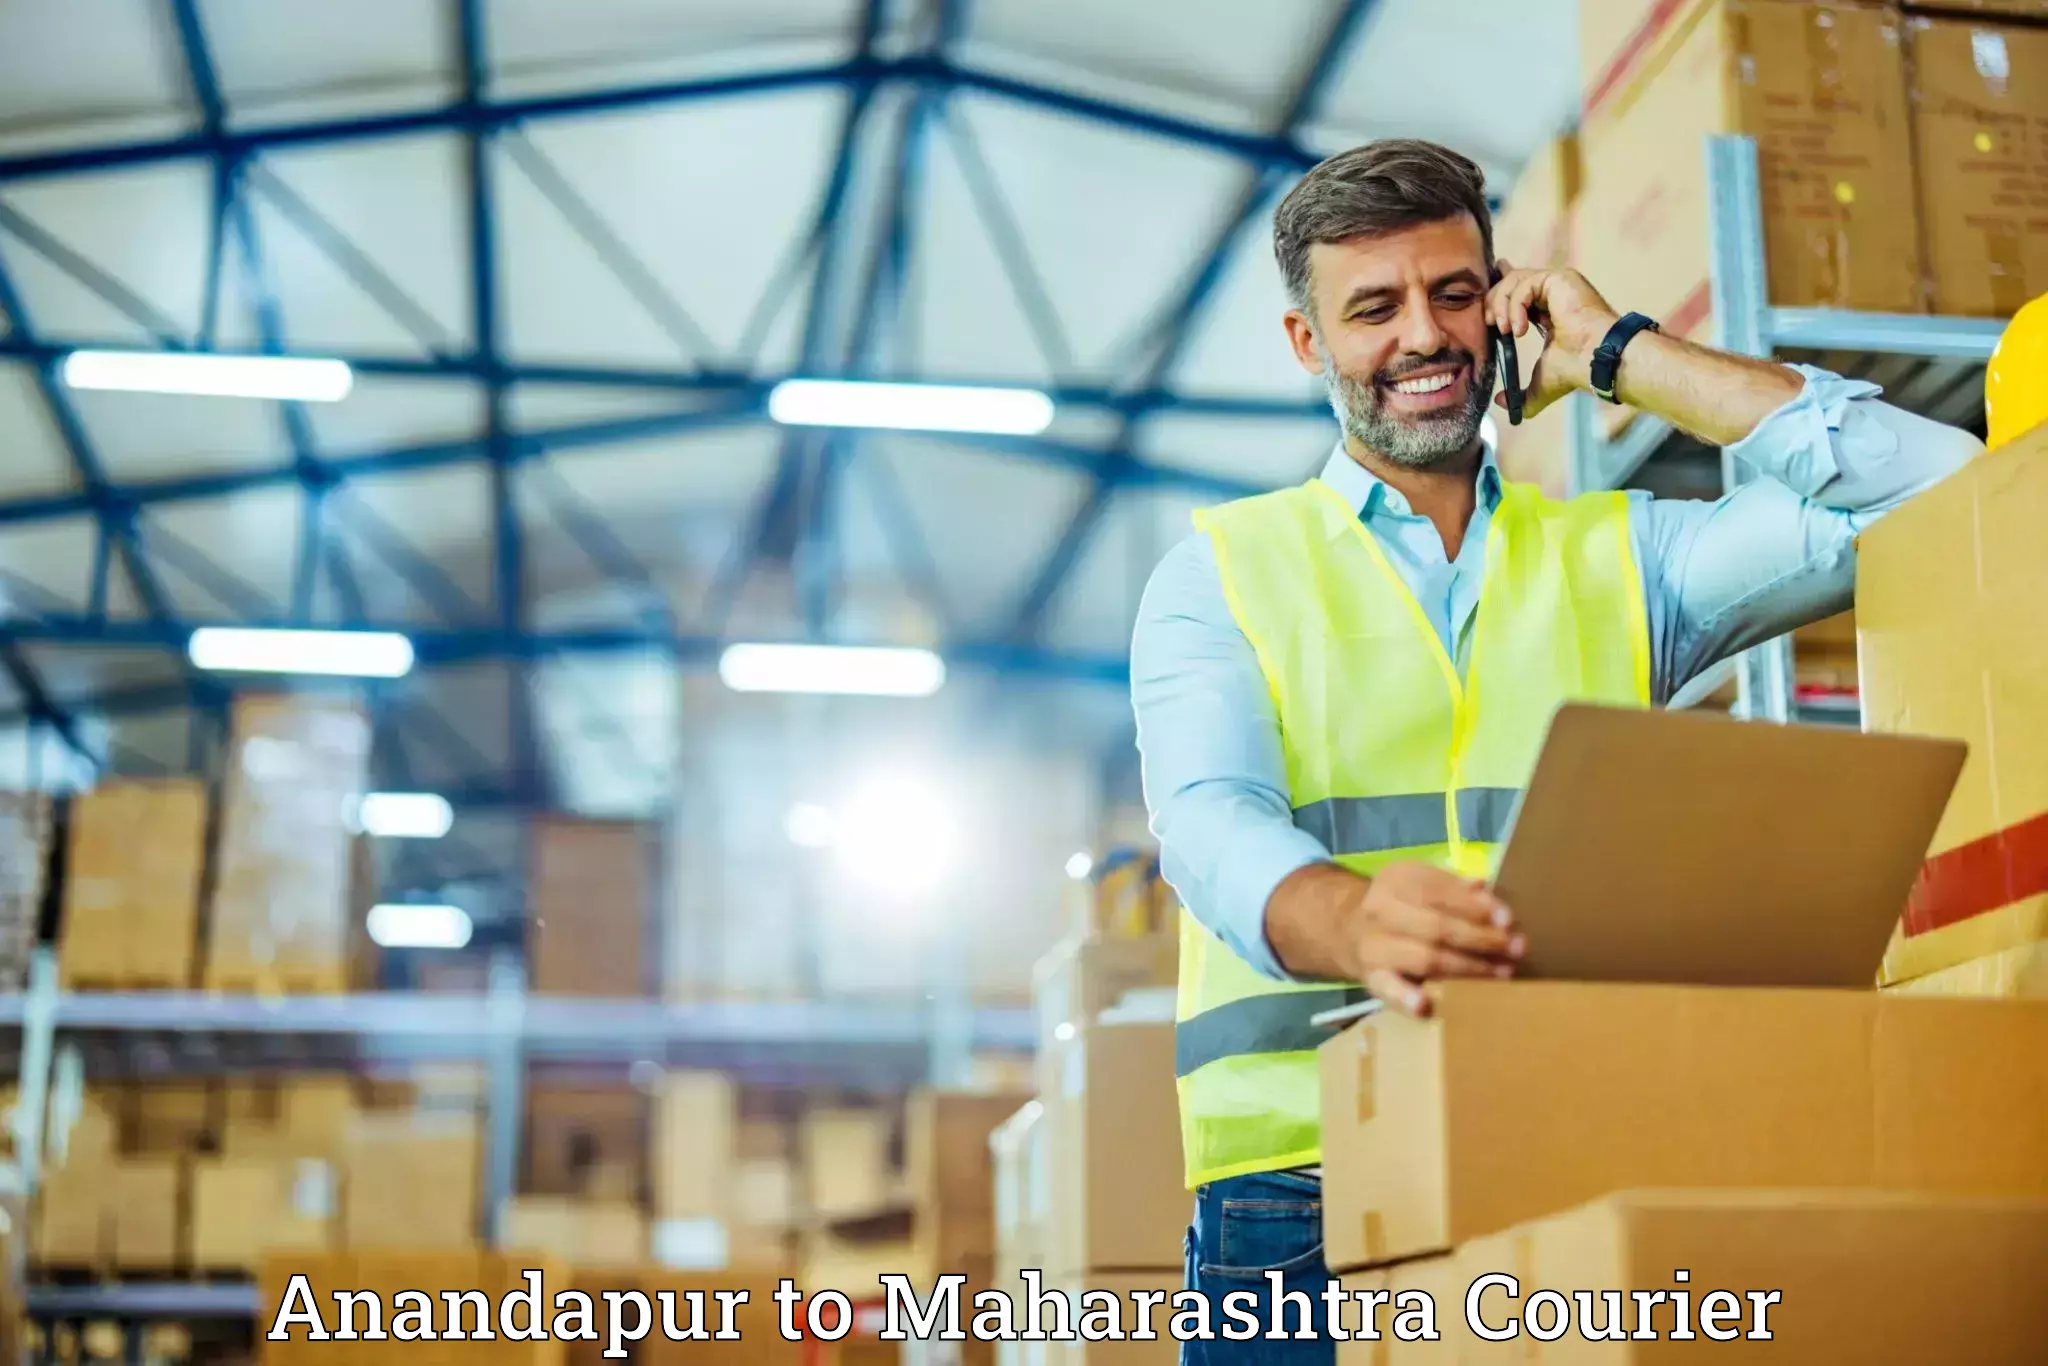 Quality moving company in Anandapur to Dadar